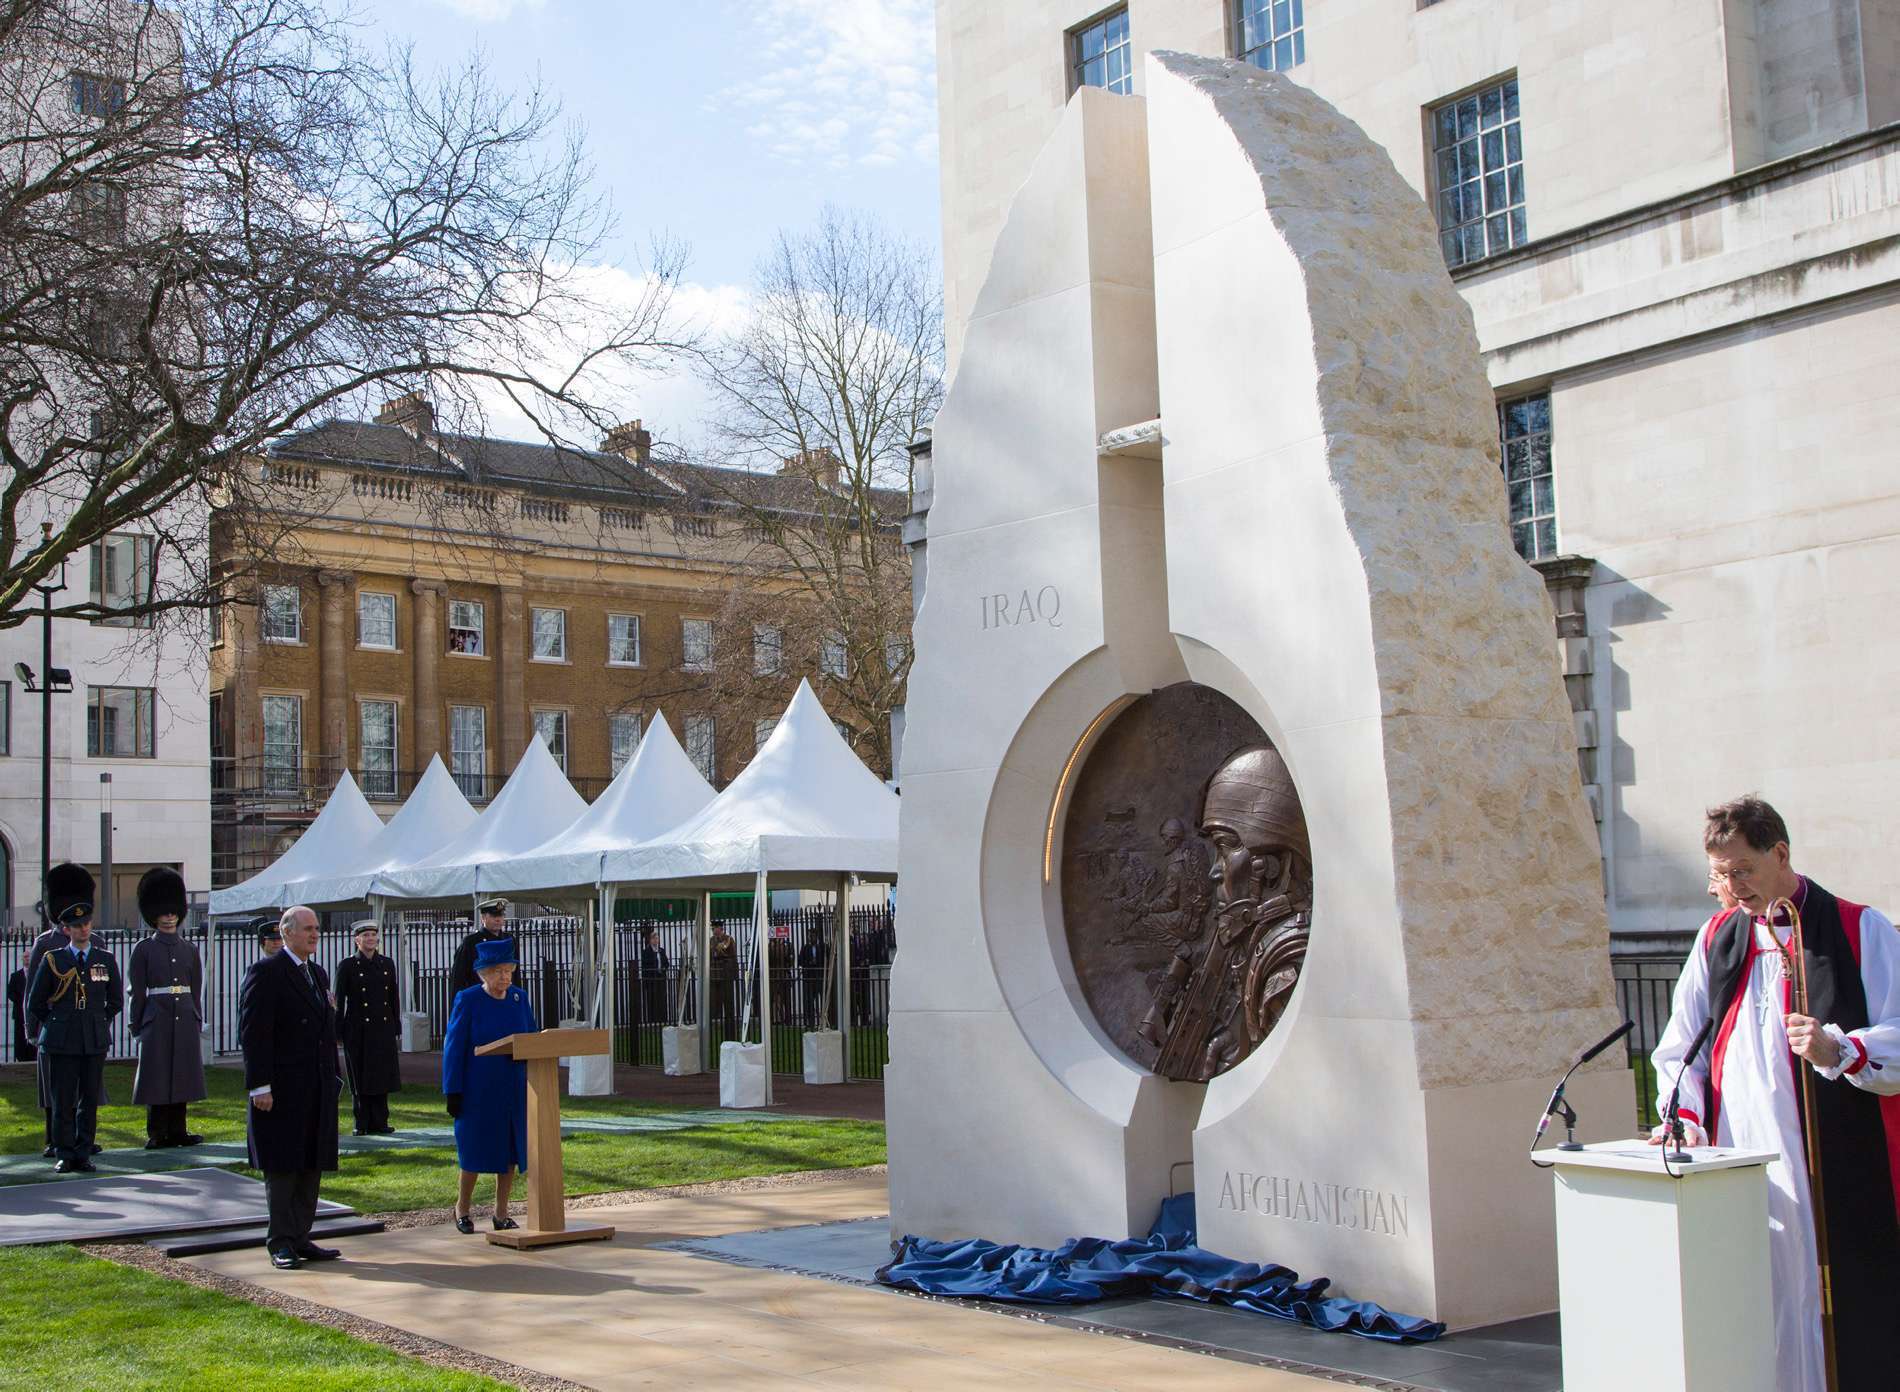 The Iraq Afghanistan Memorial